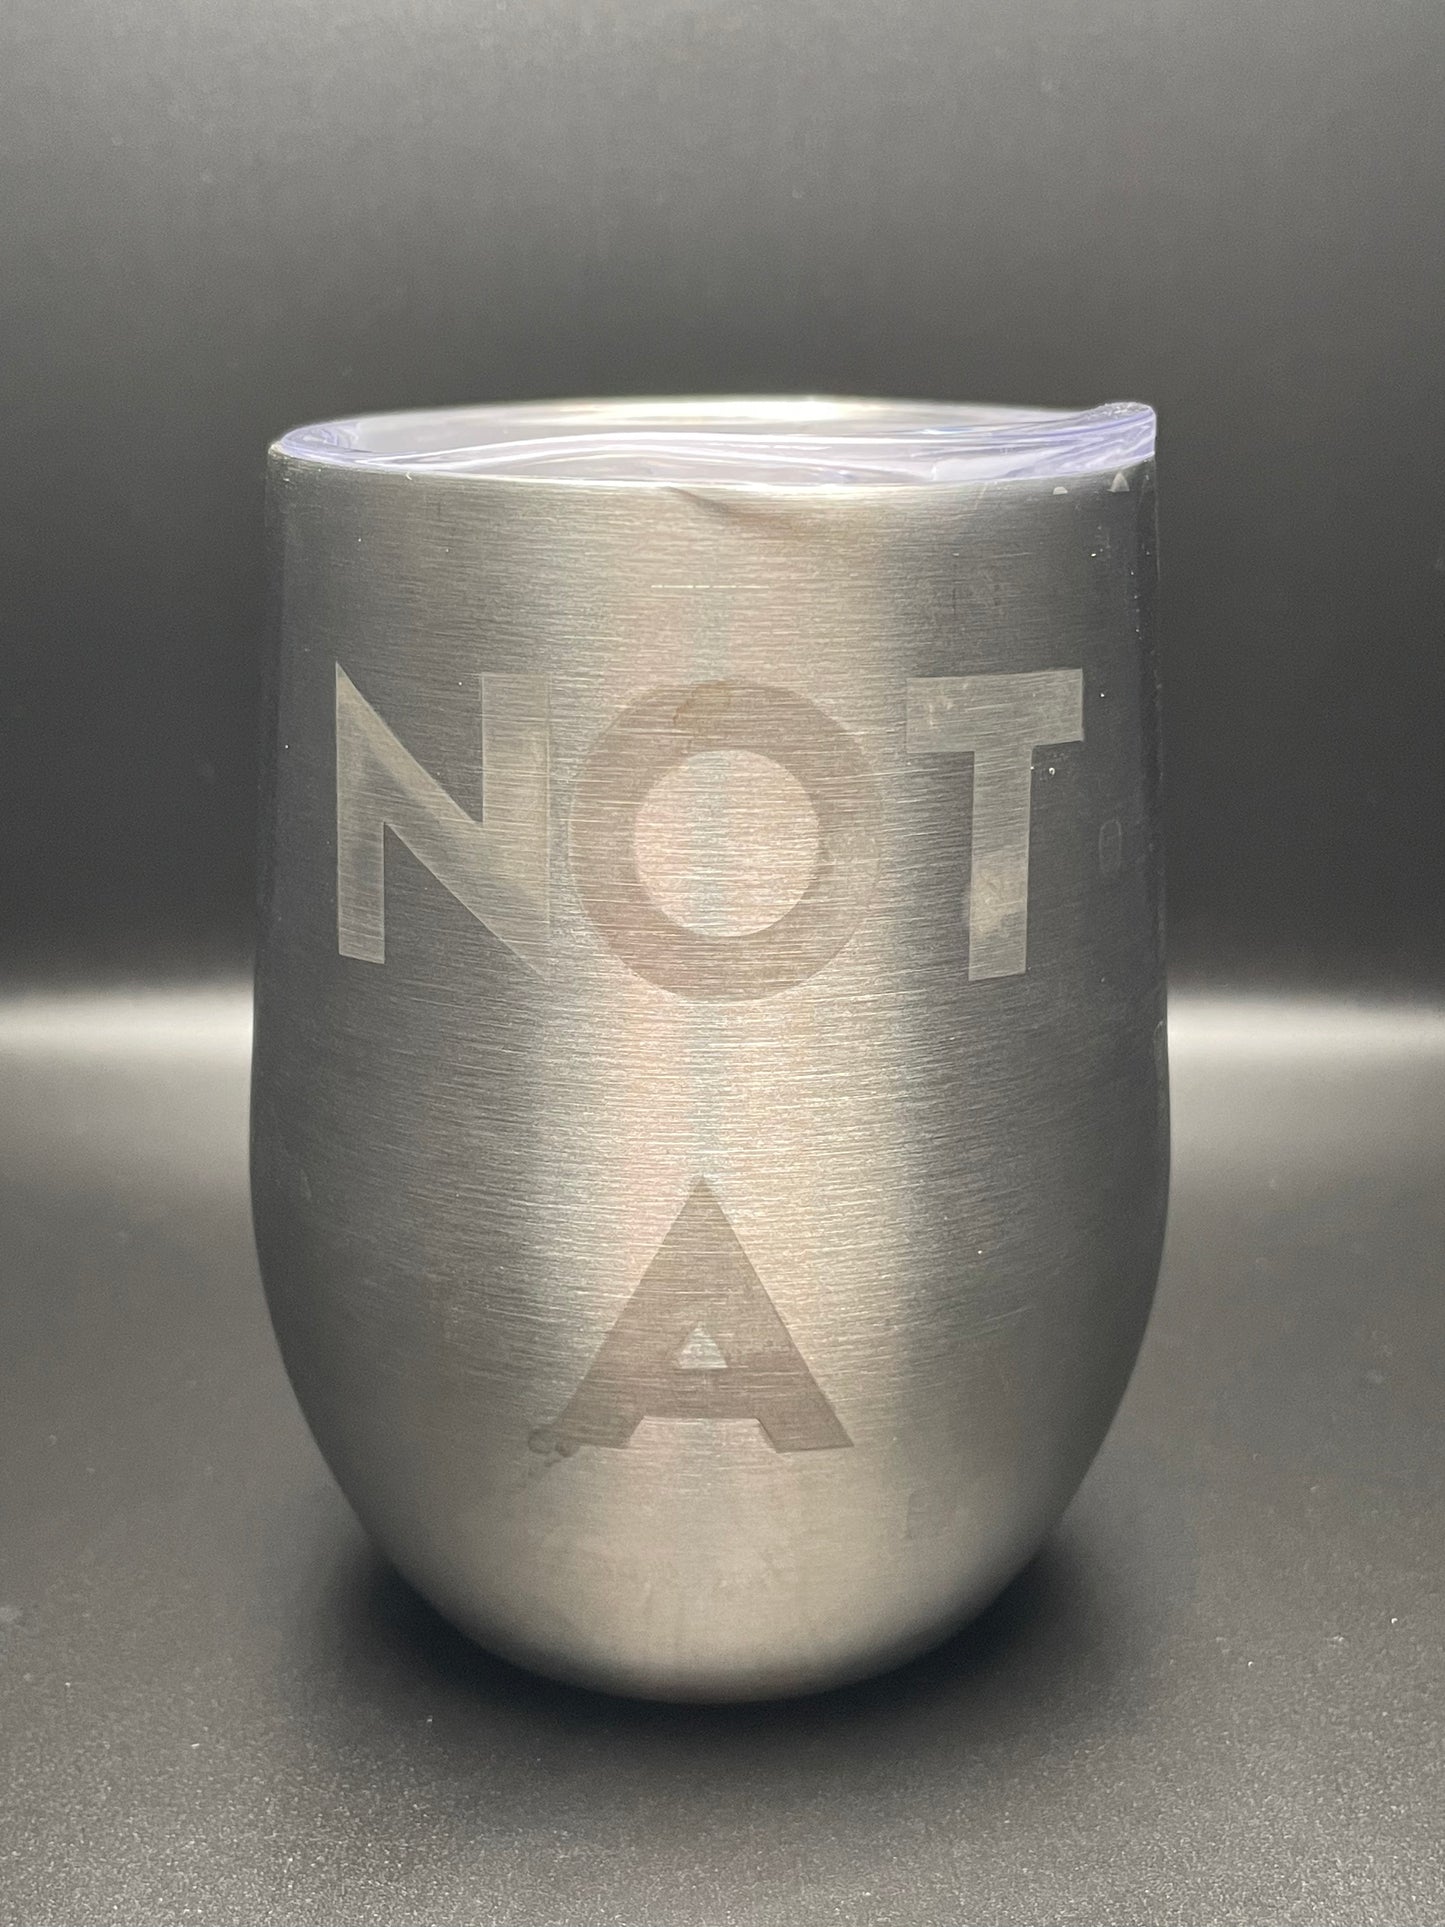 “Not a Mimic” Stainless Steel Wine Tumbler